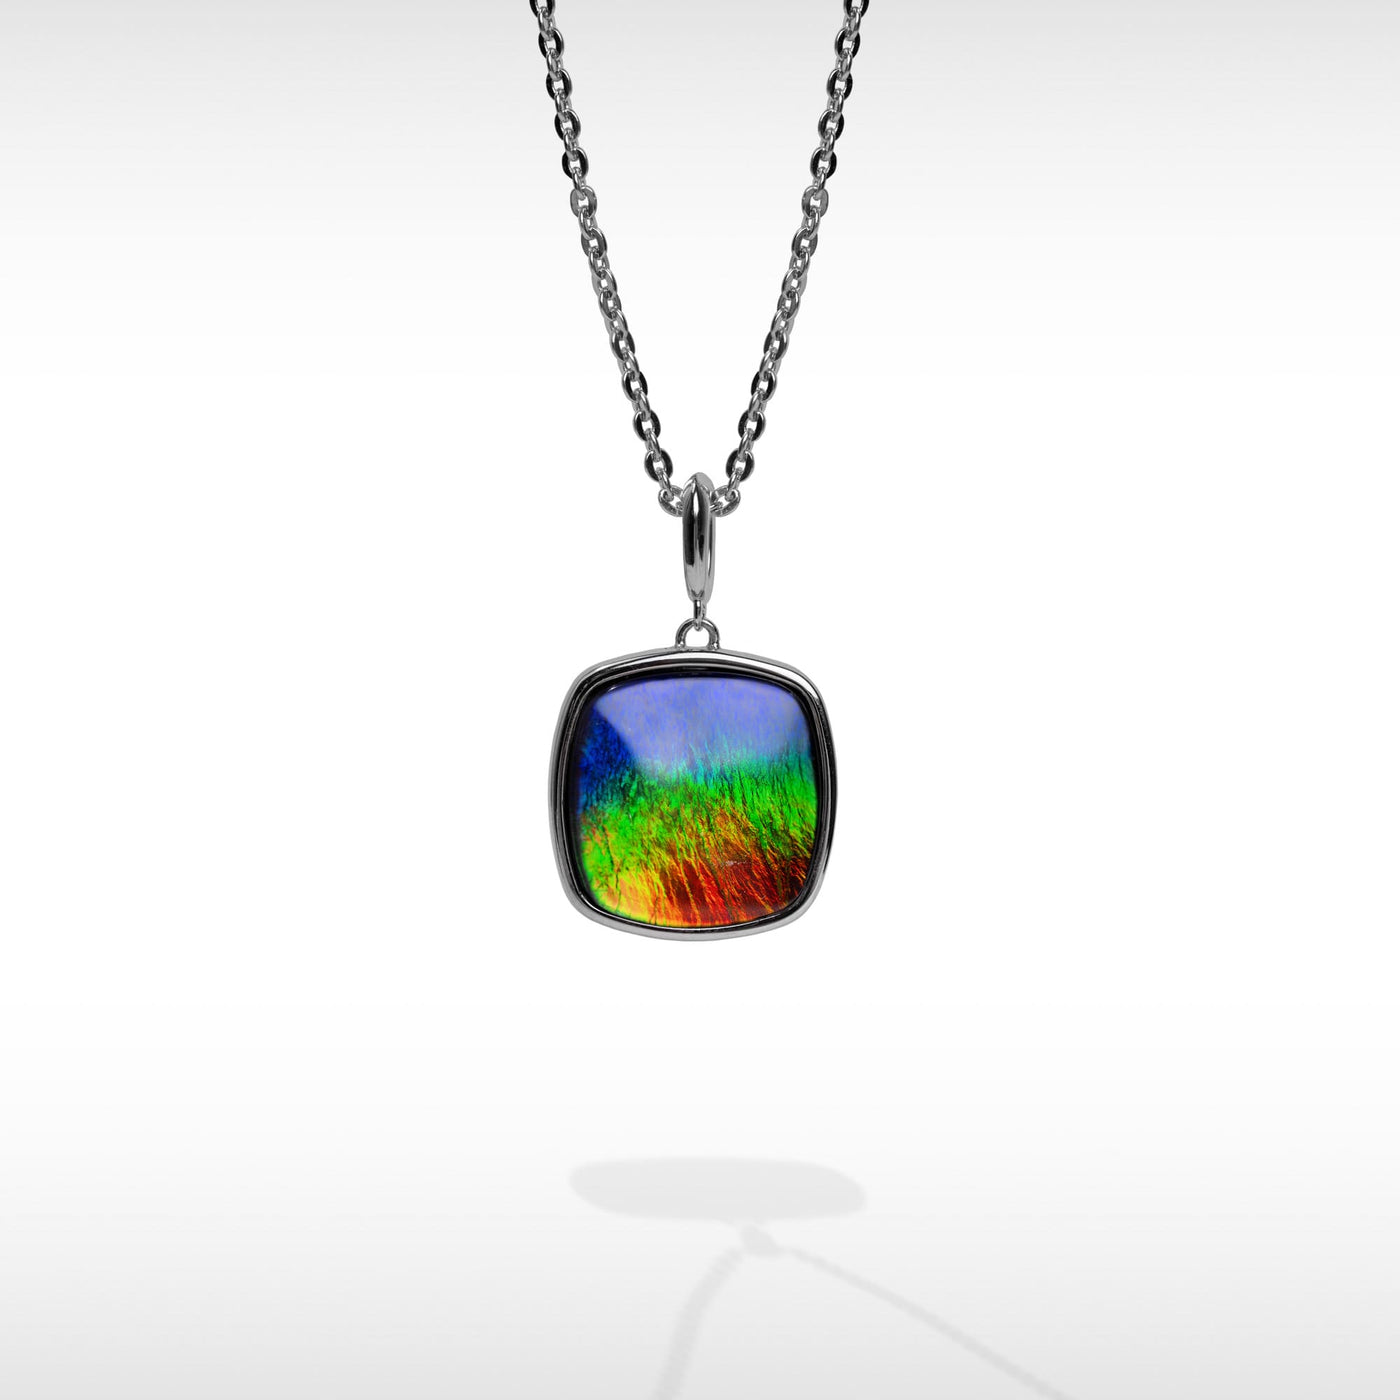 Origins cushion ammolite pendant and earring set in sterling silver